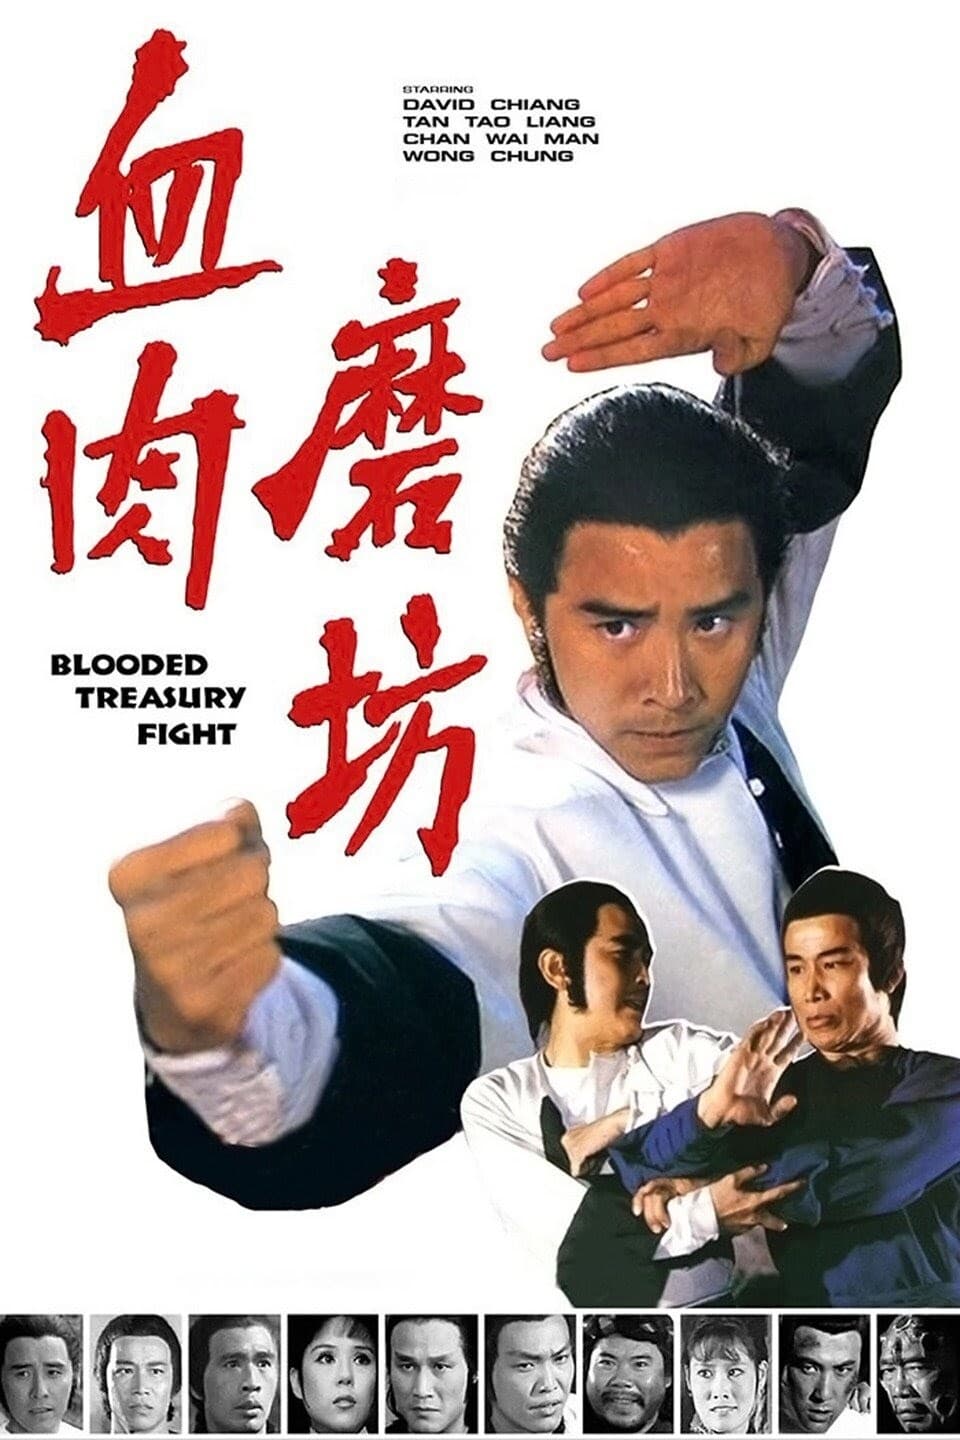 Blooded Treasury Fight (1979)